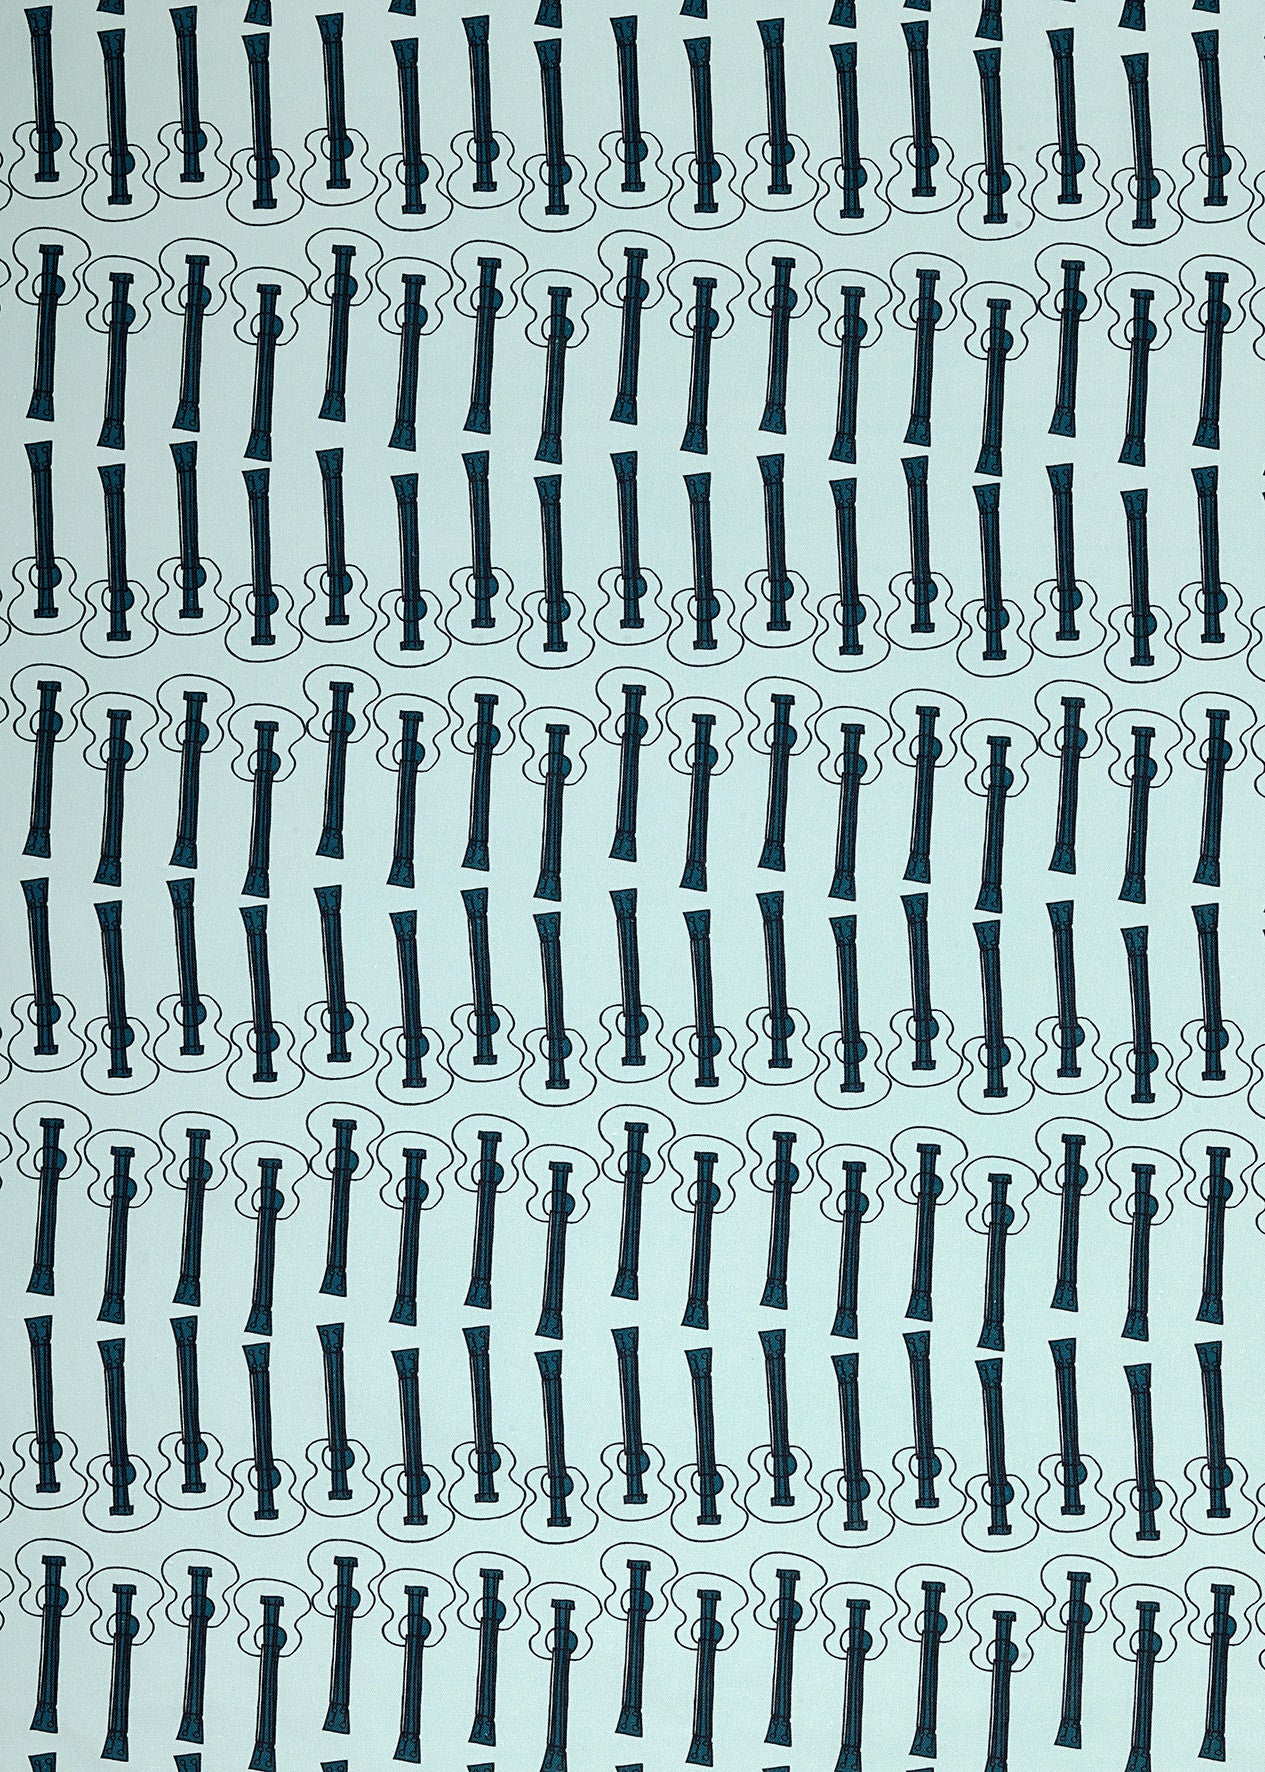 Ukelele Guitar Pattern Cotton Linen Home Decor Interiors Fabric by the Meter or yard for curtains, blinds or upholstery in Light Celeste Blue ships from Canada (USA)